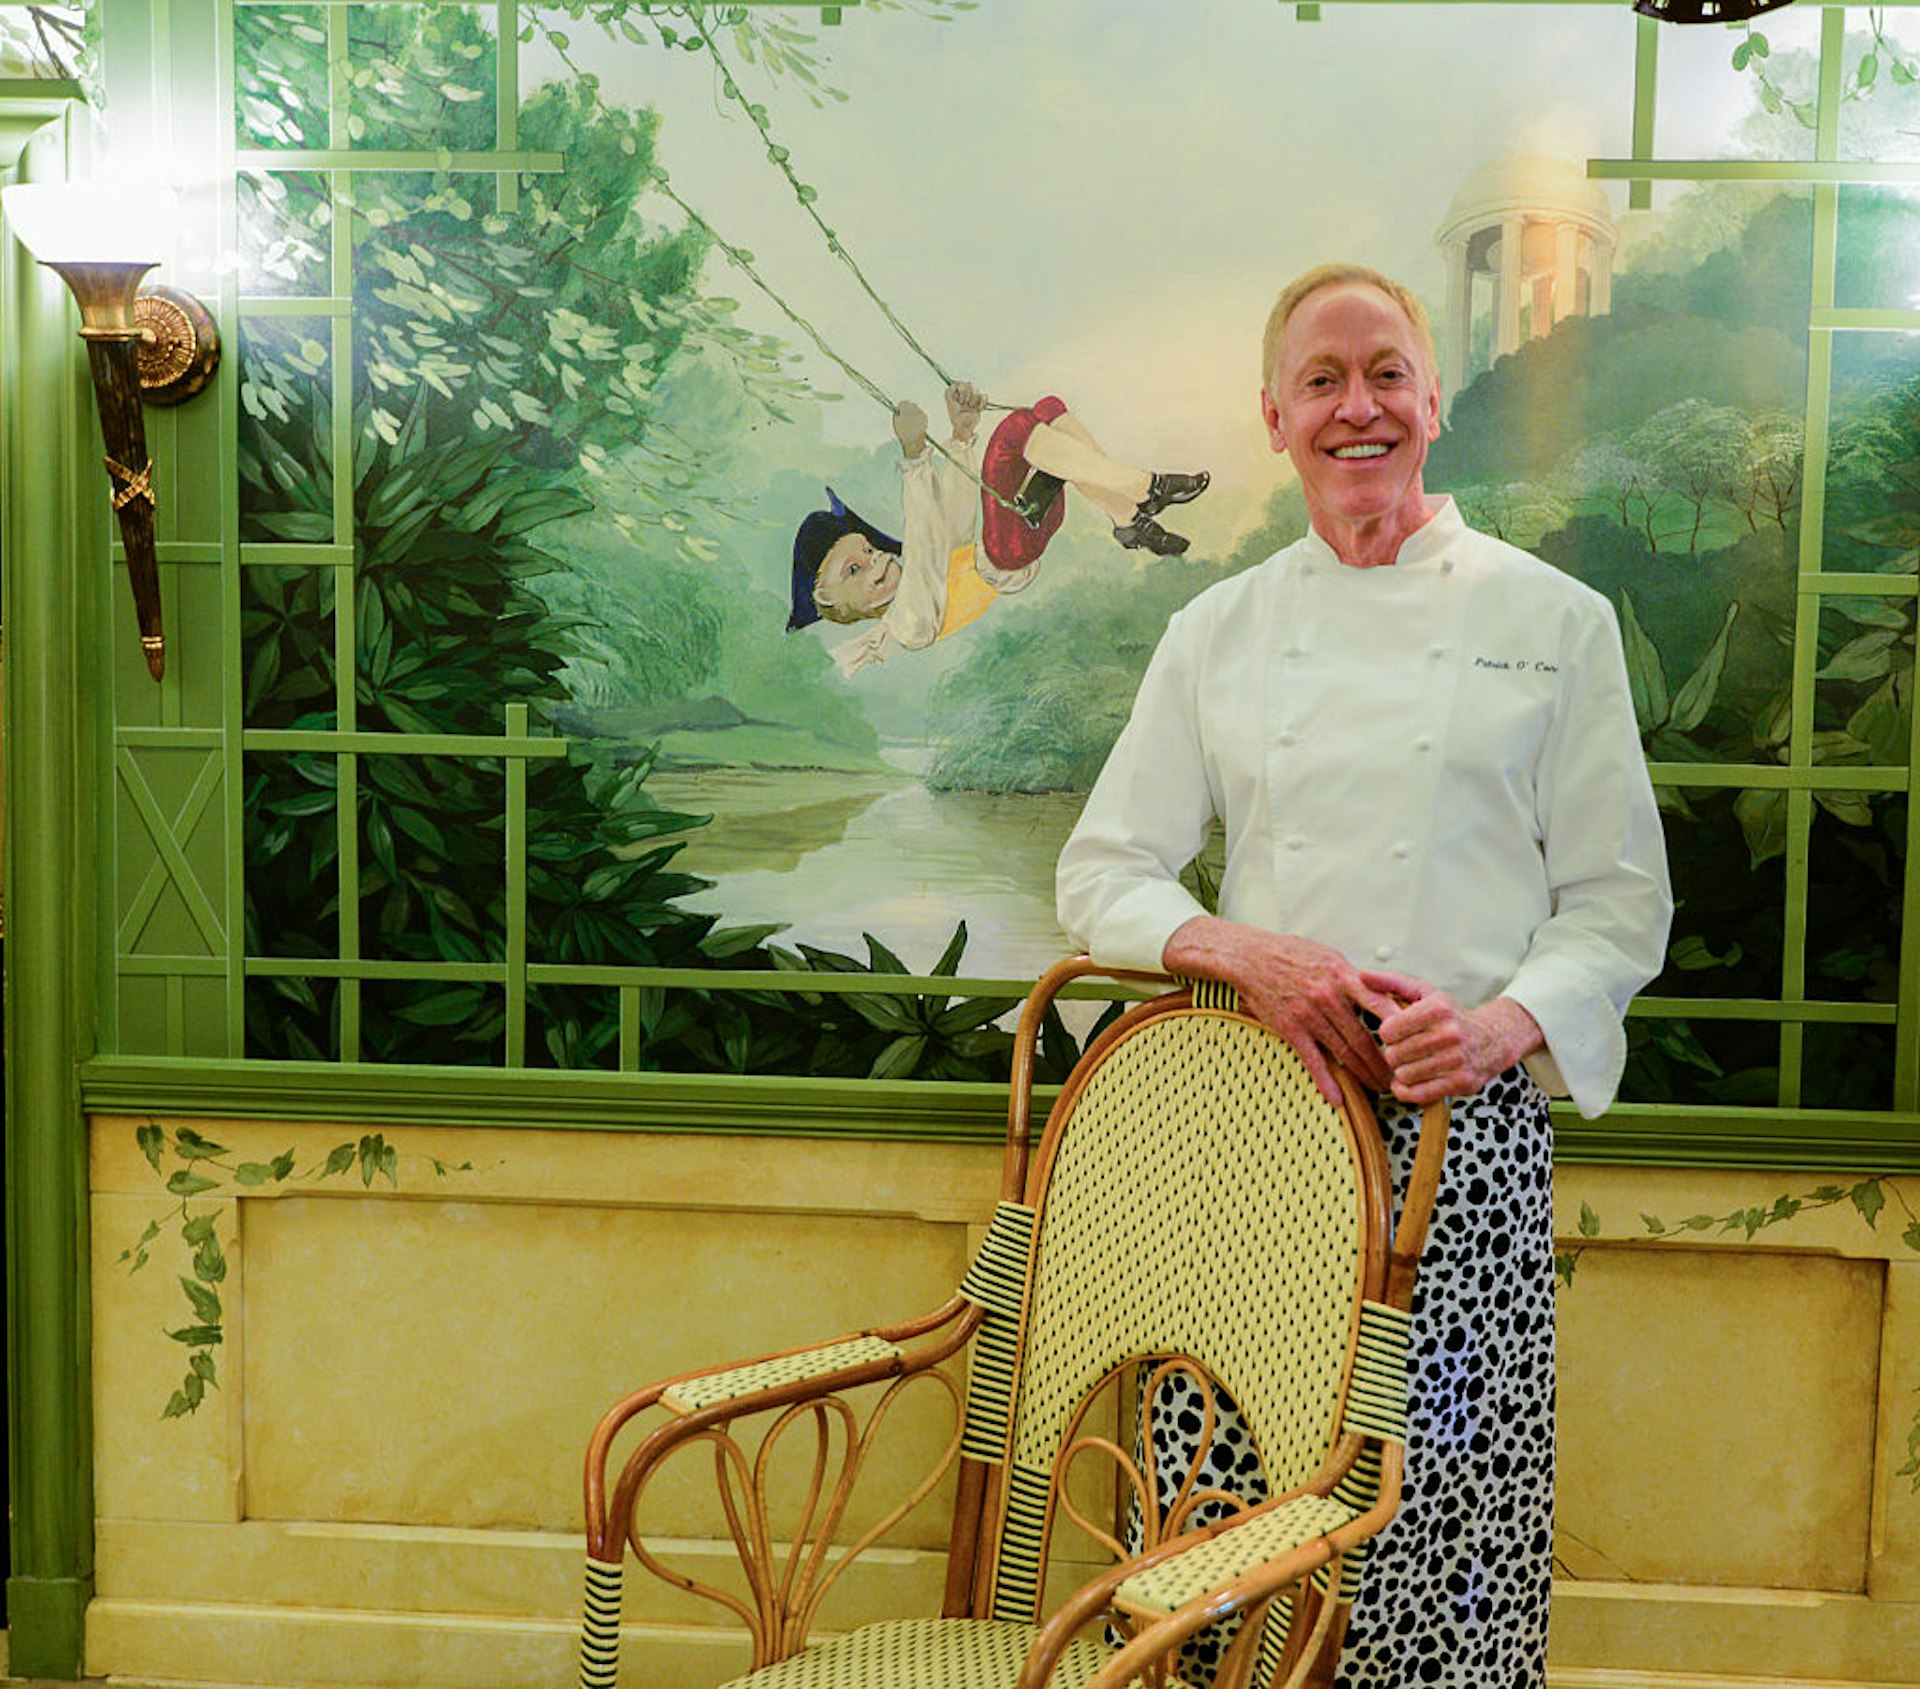 Chef/Owner Patrick OConnell stands in the dining room at The Inn At Little Washington in front of a whimsical mural of a young boy on a swing